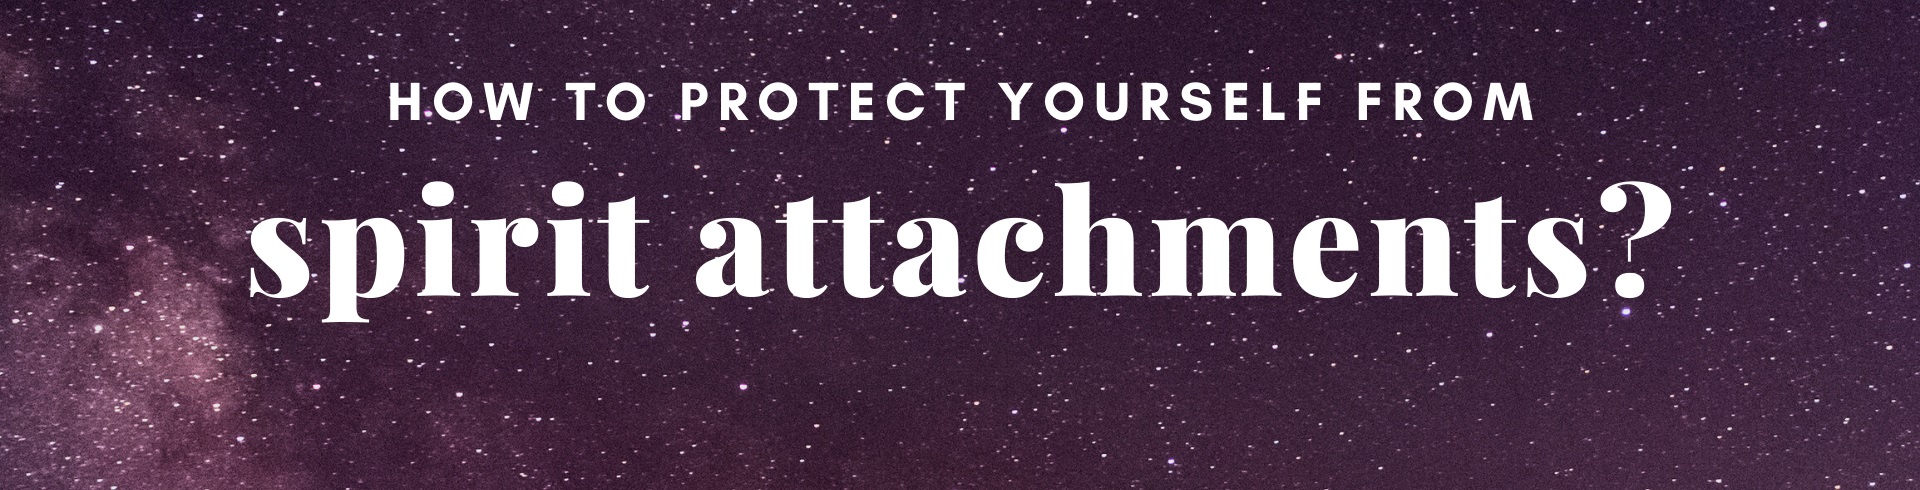 How to Protect Yourself From Spirit Attachments PART 1